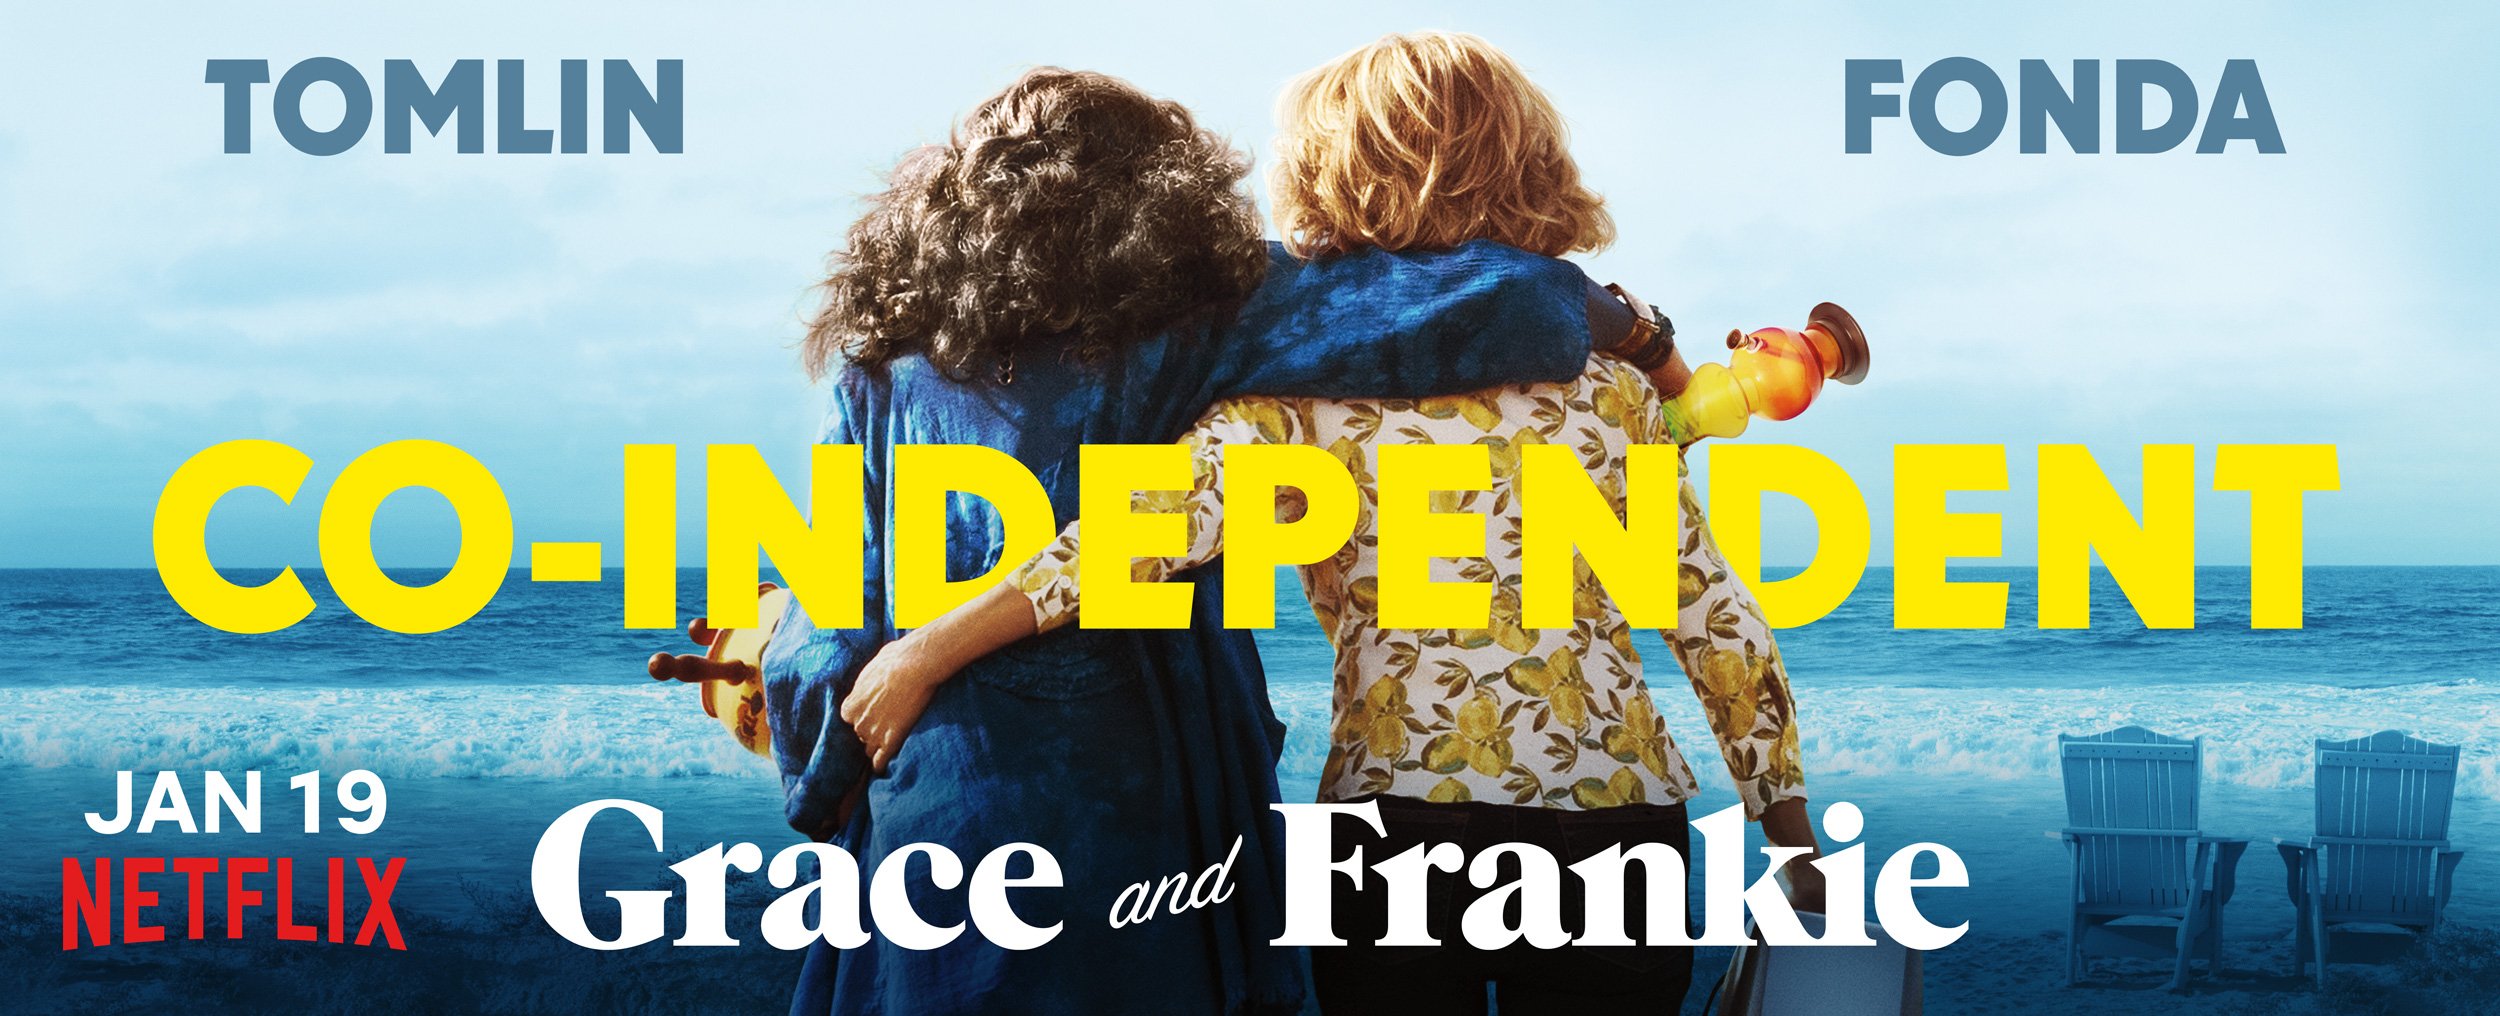 Promotional photos for 'Grace and Frankie' show Grace Hanson and Frankie Bergstein sitting together looking at the ocean